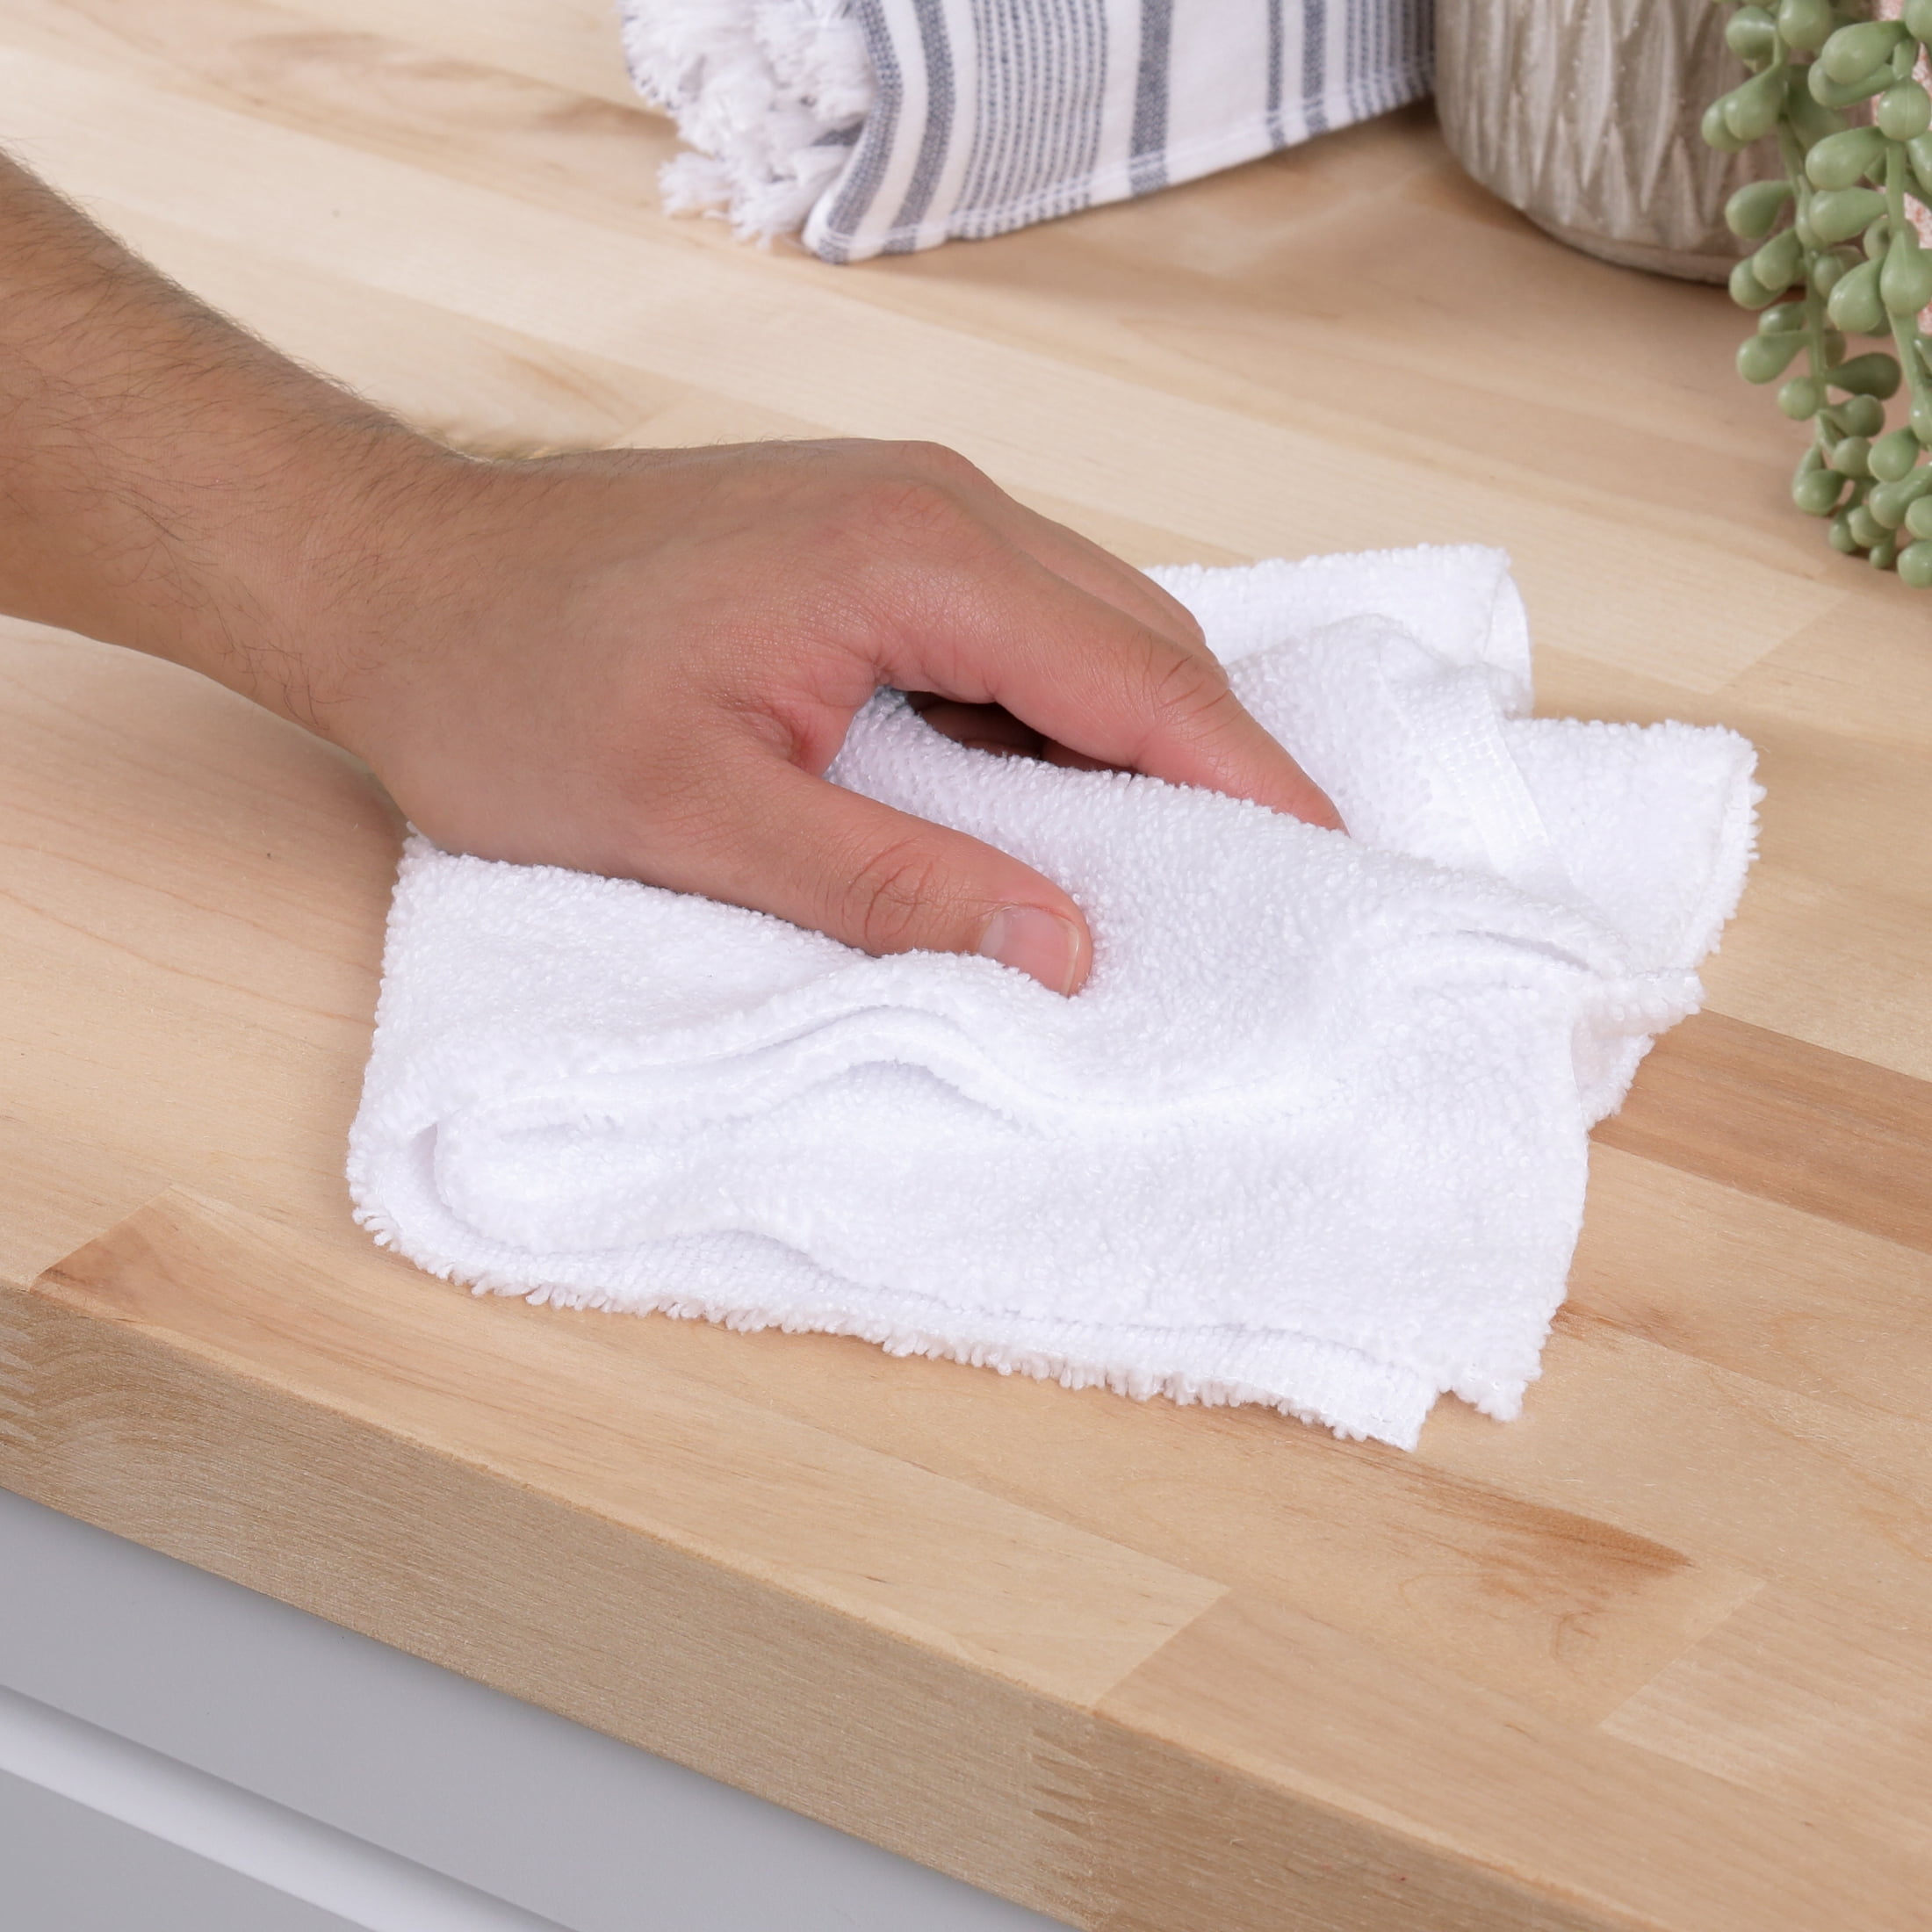 Great Value Multi-Purpose Microfiber Cleaning Towels, White, 5 Count